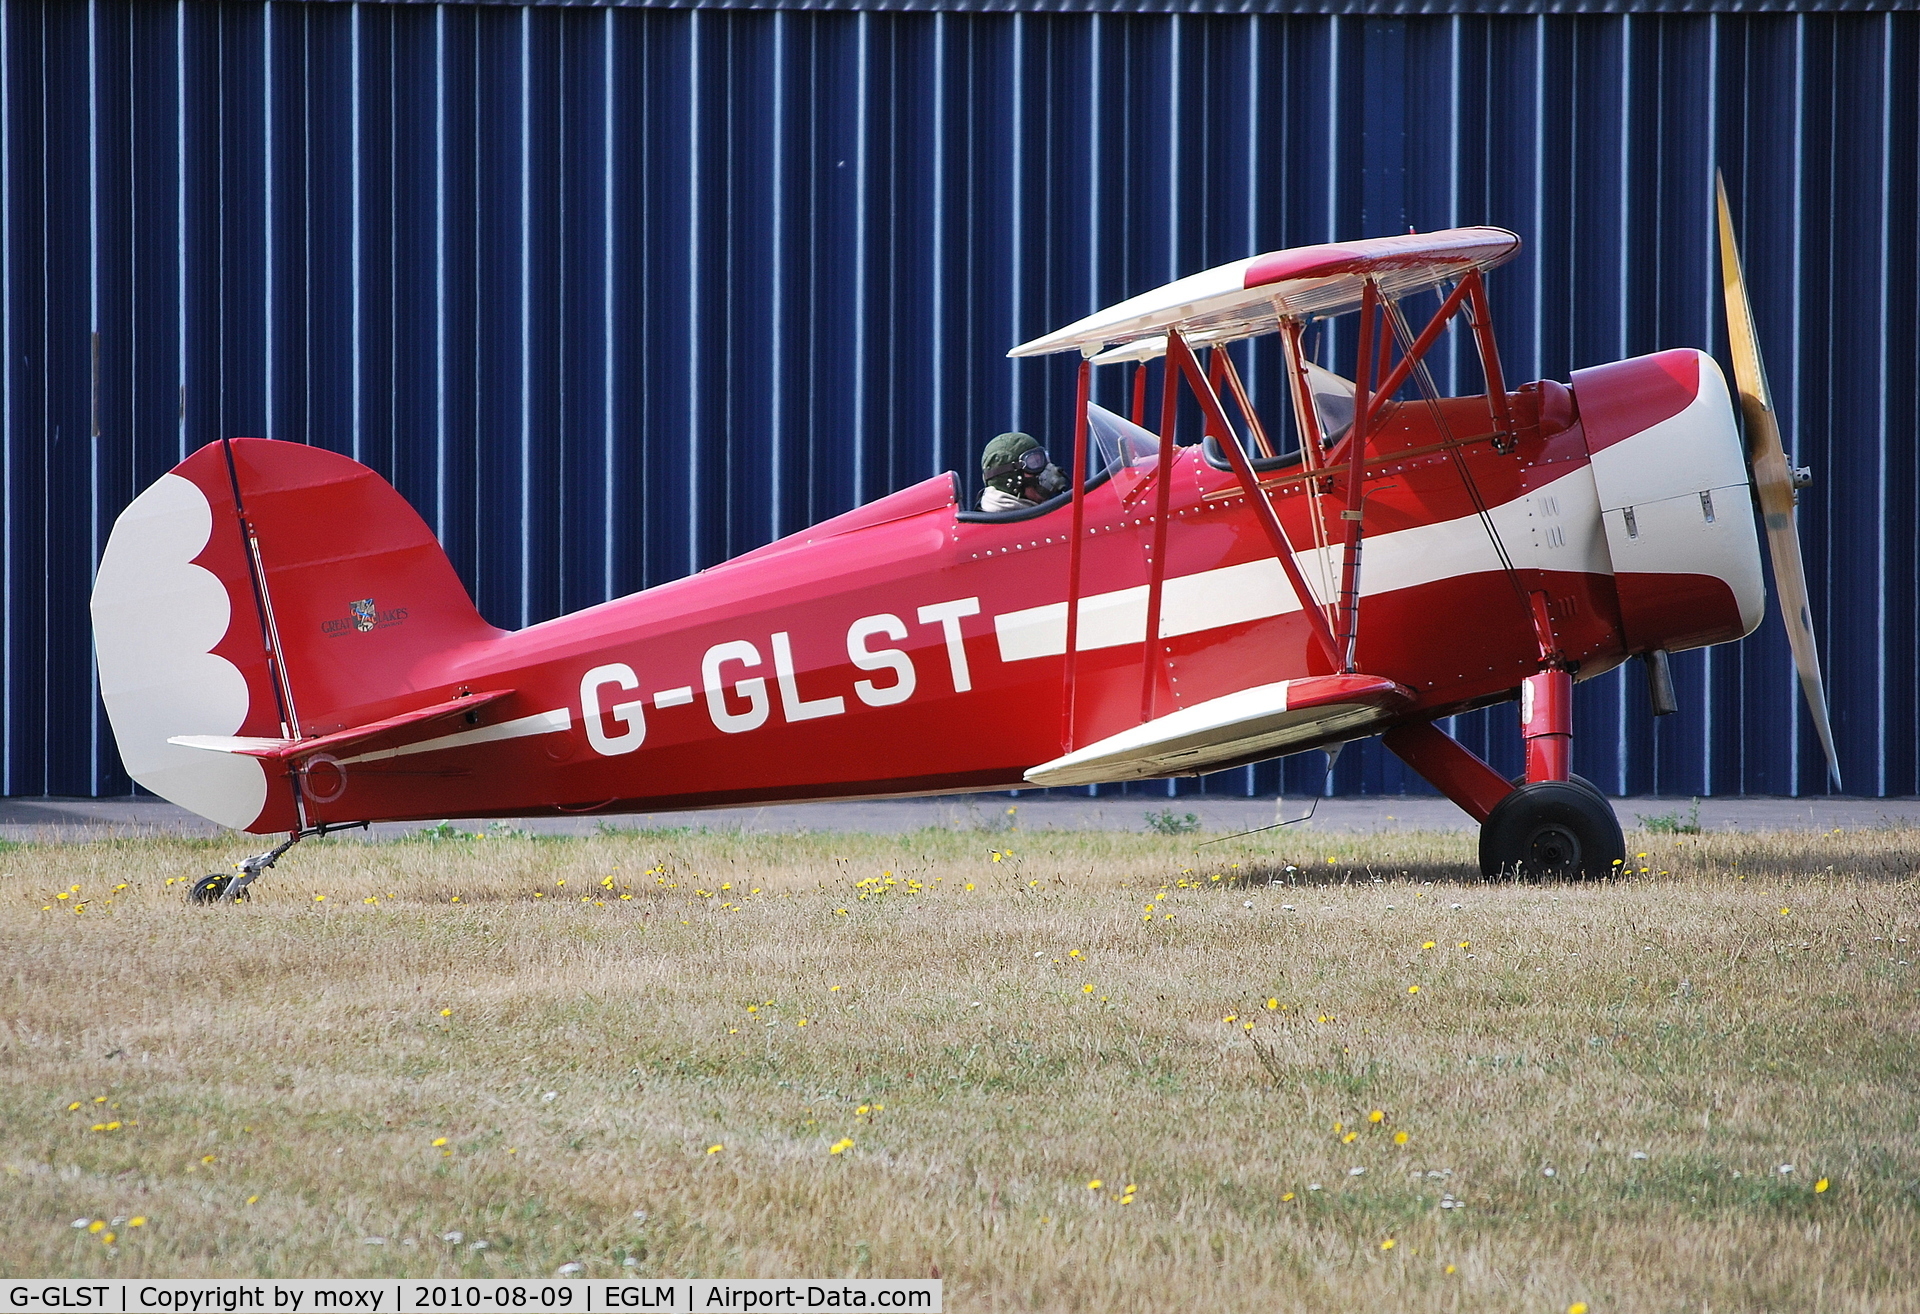 G-GLST, 2003 Great Lakes 2T-1A Sport Trainer C/N PFA 321-13646, Great Lakes Sports Trainer at White Waltham